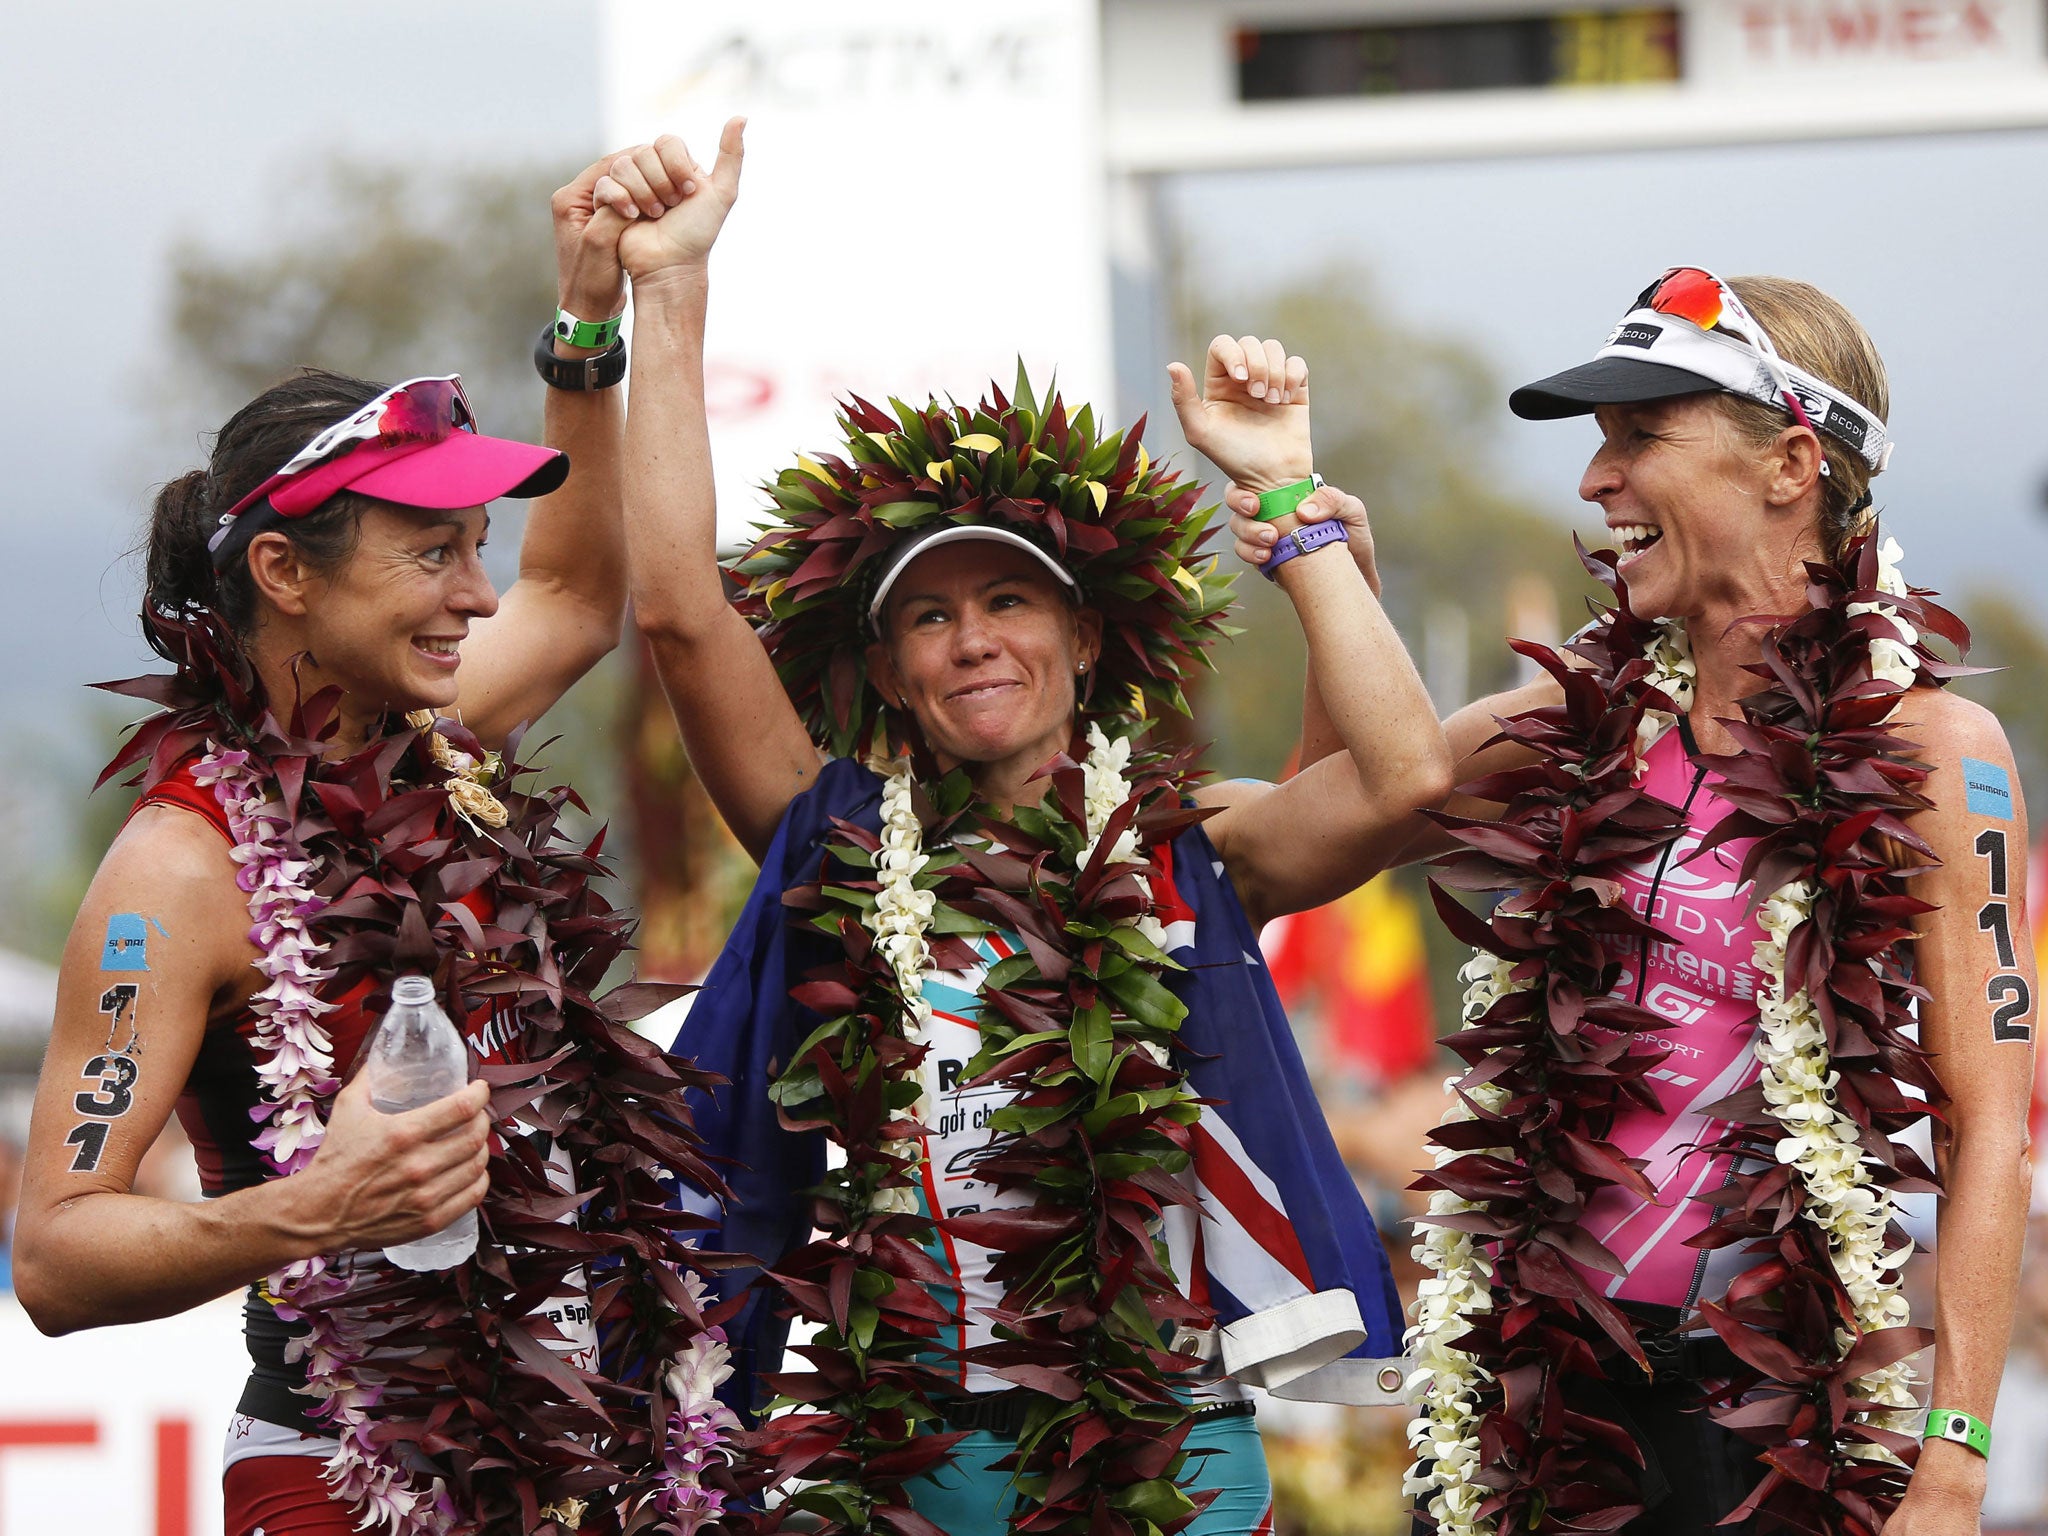 Mirinda Carfrae, centre, of Australia celebrates after winning the Ironman World Championships 2013 in Kailua-Kona, Hawaii. Carfrae won with a time of 08:52:14 h ahead of second placed Rachel Joyce, left, and third placed Liz Blatchford, right, both from